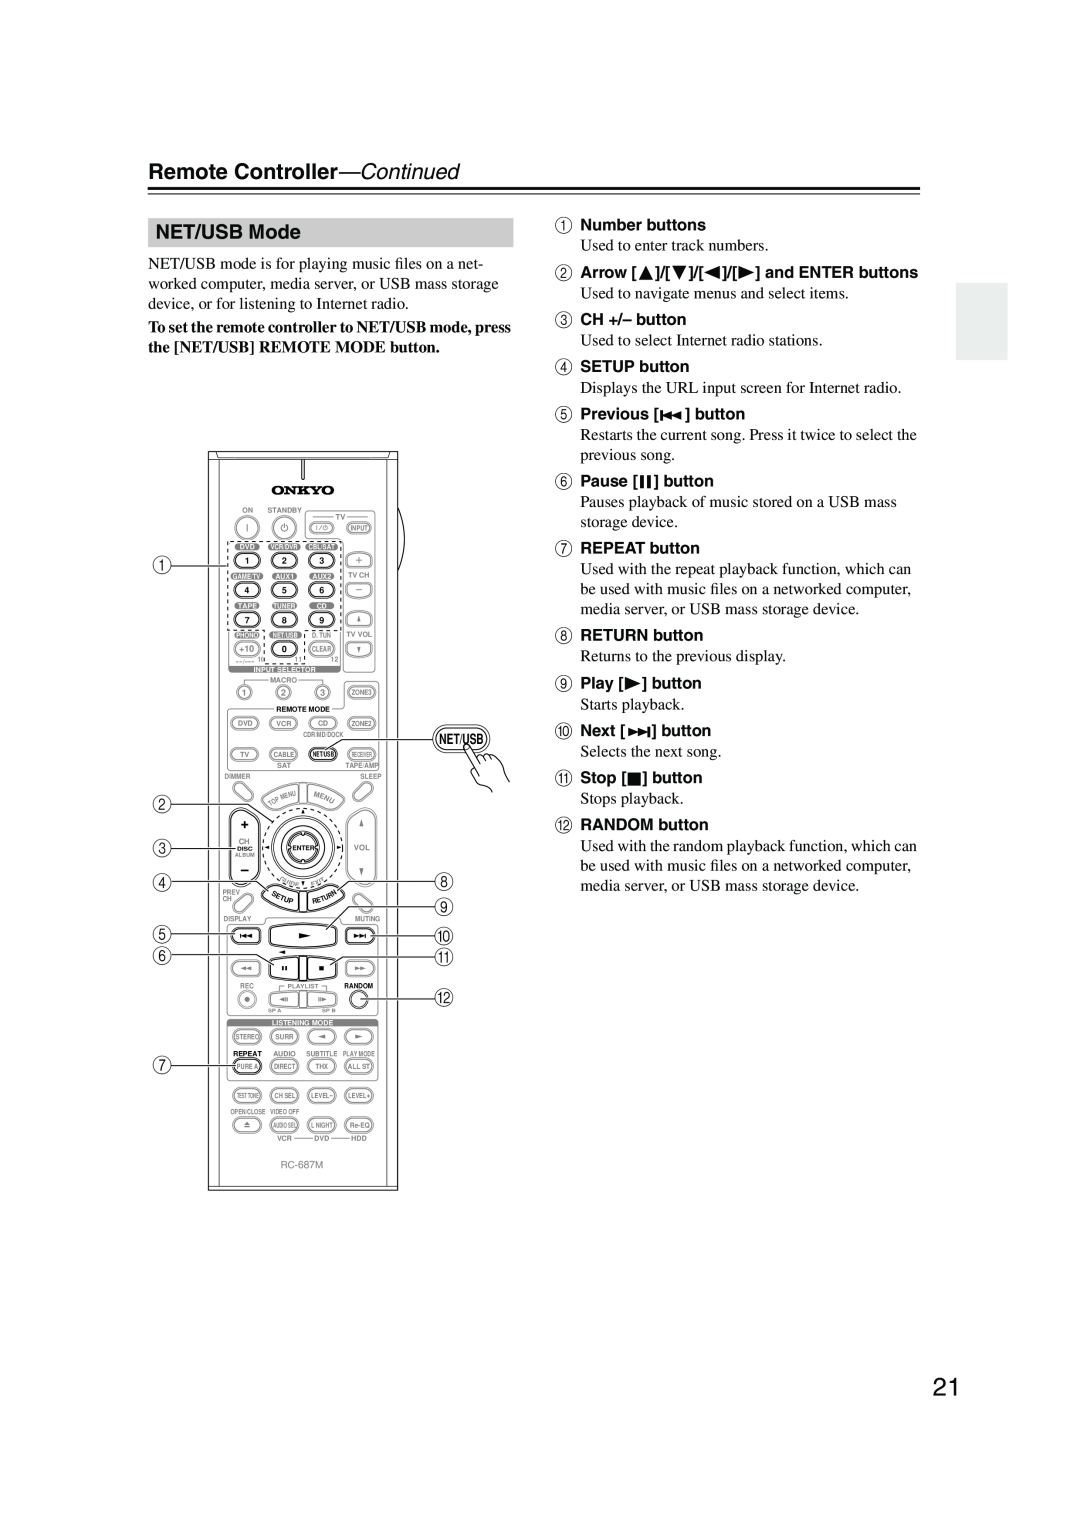 Onkyo TX-NR905 instruction manual NET/USB Mode, Remote Controller—Continued 